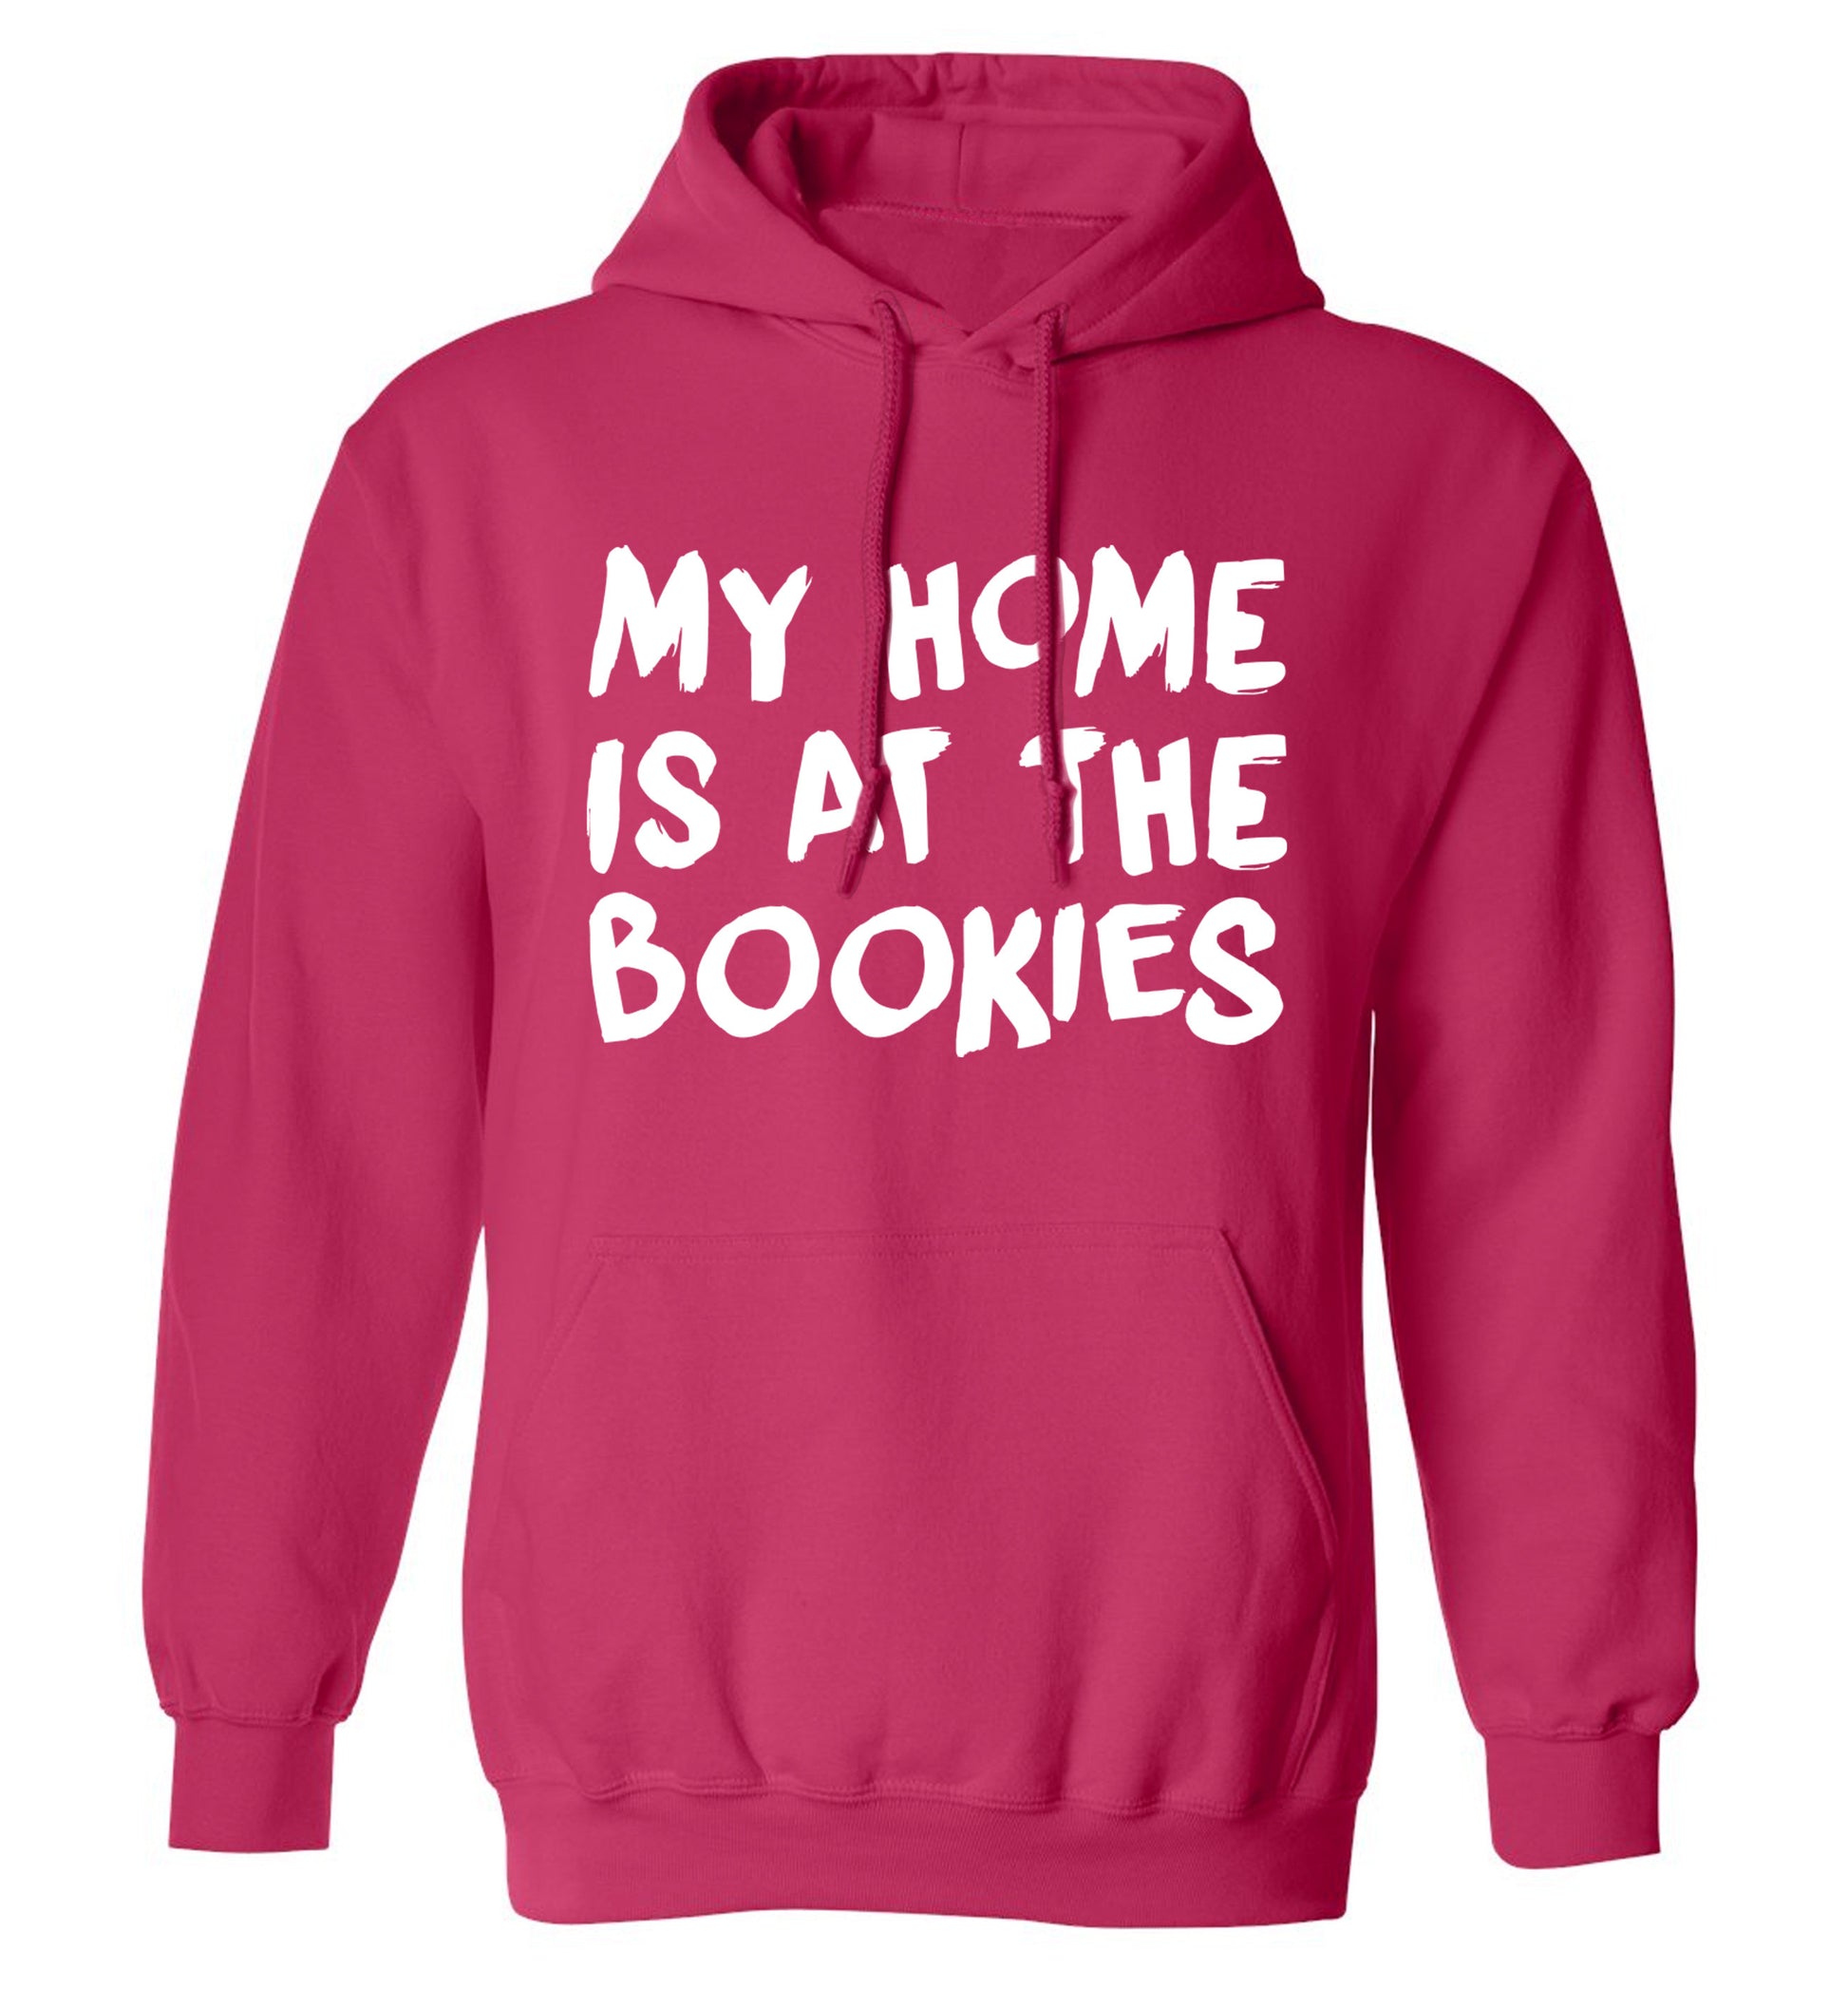 My home is at the bookies adults unisex pink hoodie 2XL